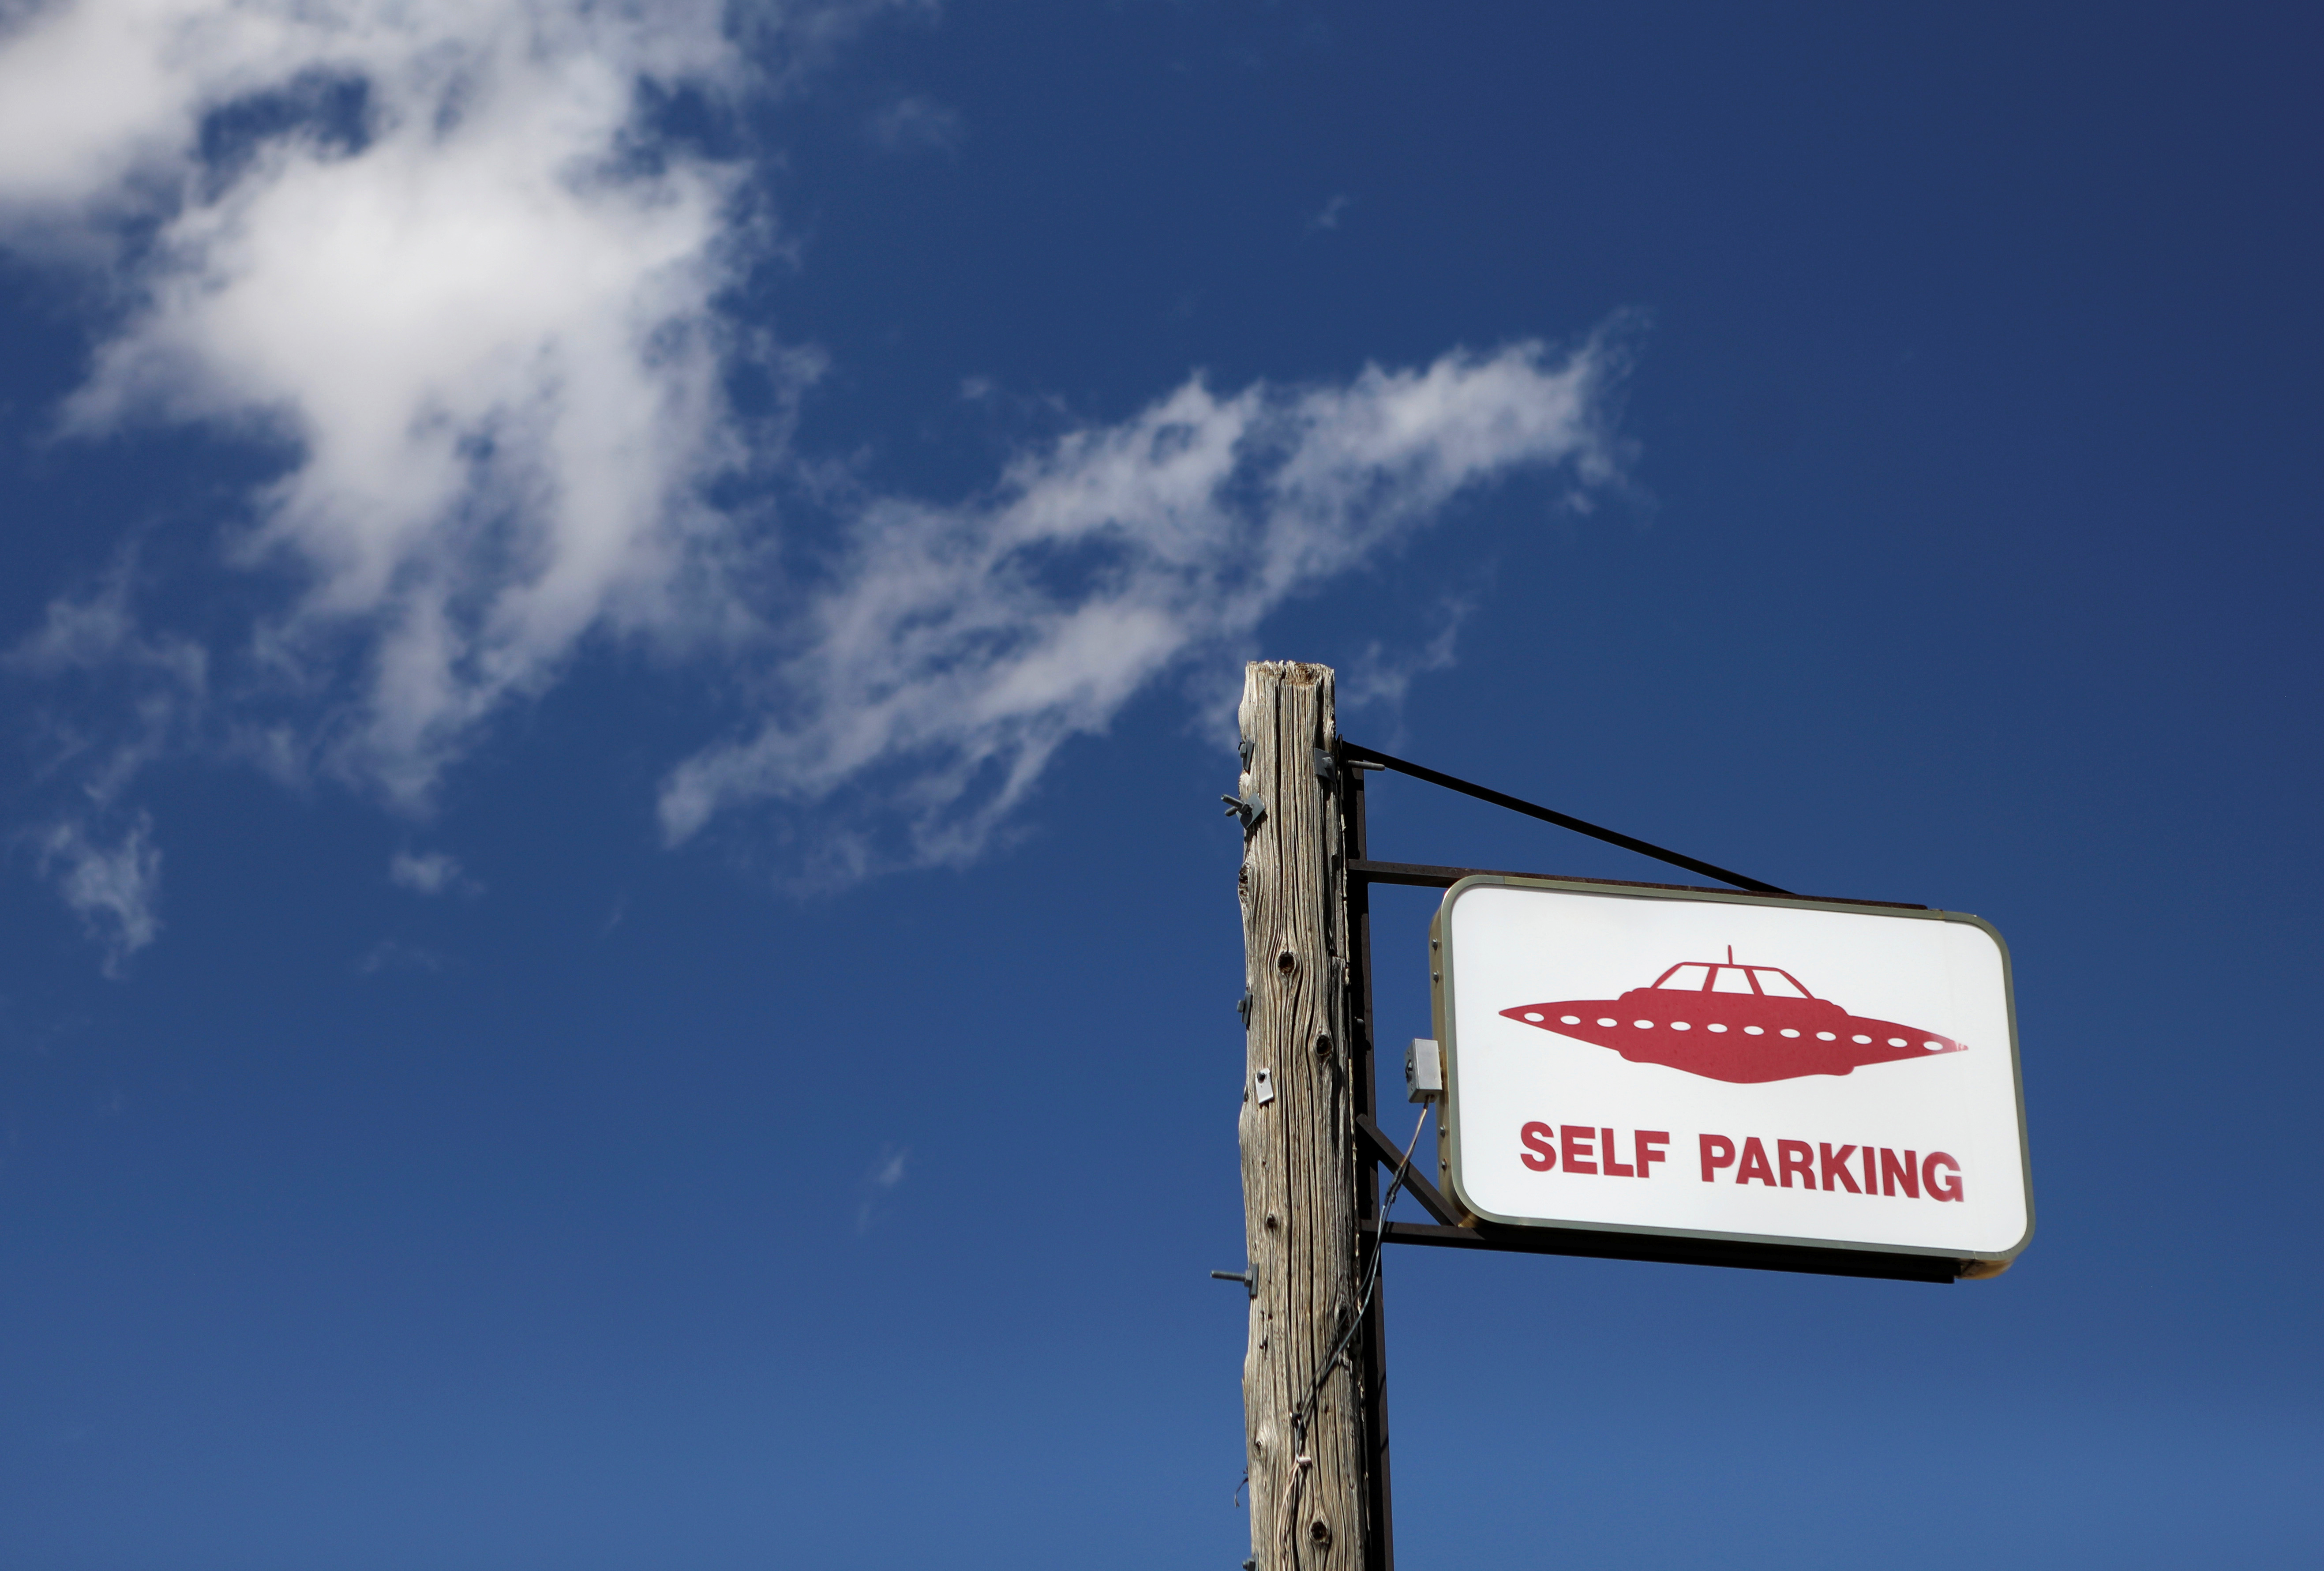 A parking sign at the Little A'Le'Inn as an influx of tourists responding to a call to 'storm' Area 51, a secretive U.S. military base believed by UFO enthusiasts to hold government secrets about extra-terrestrials, is expected in Rachel, Nevada